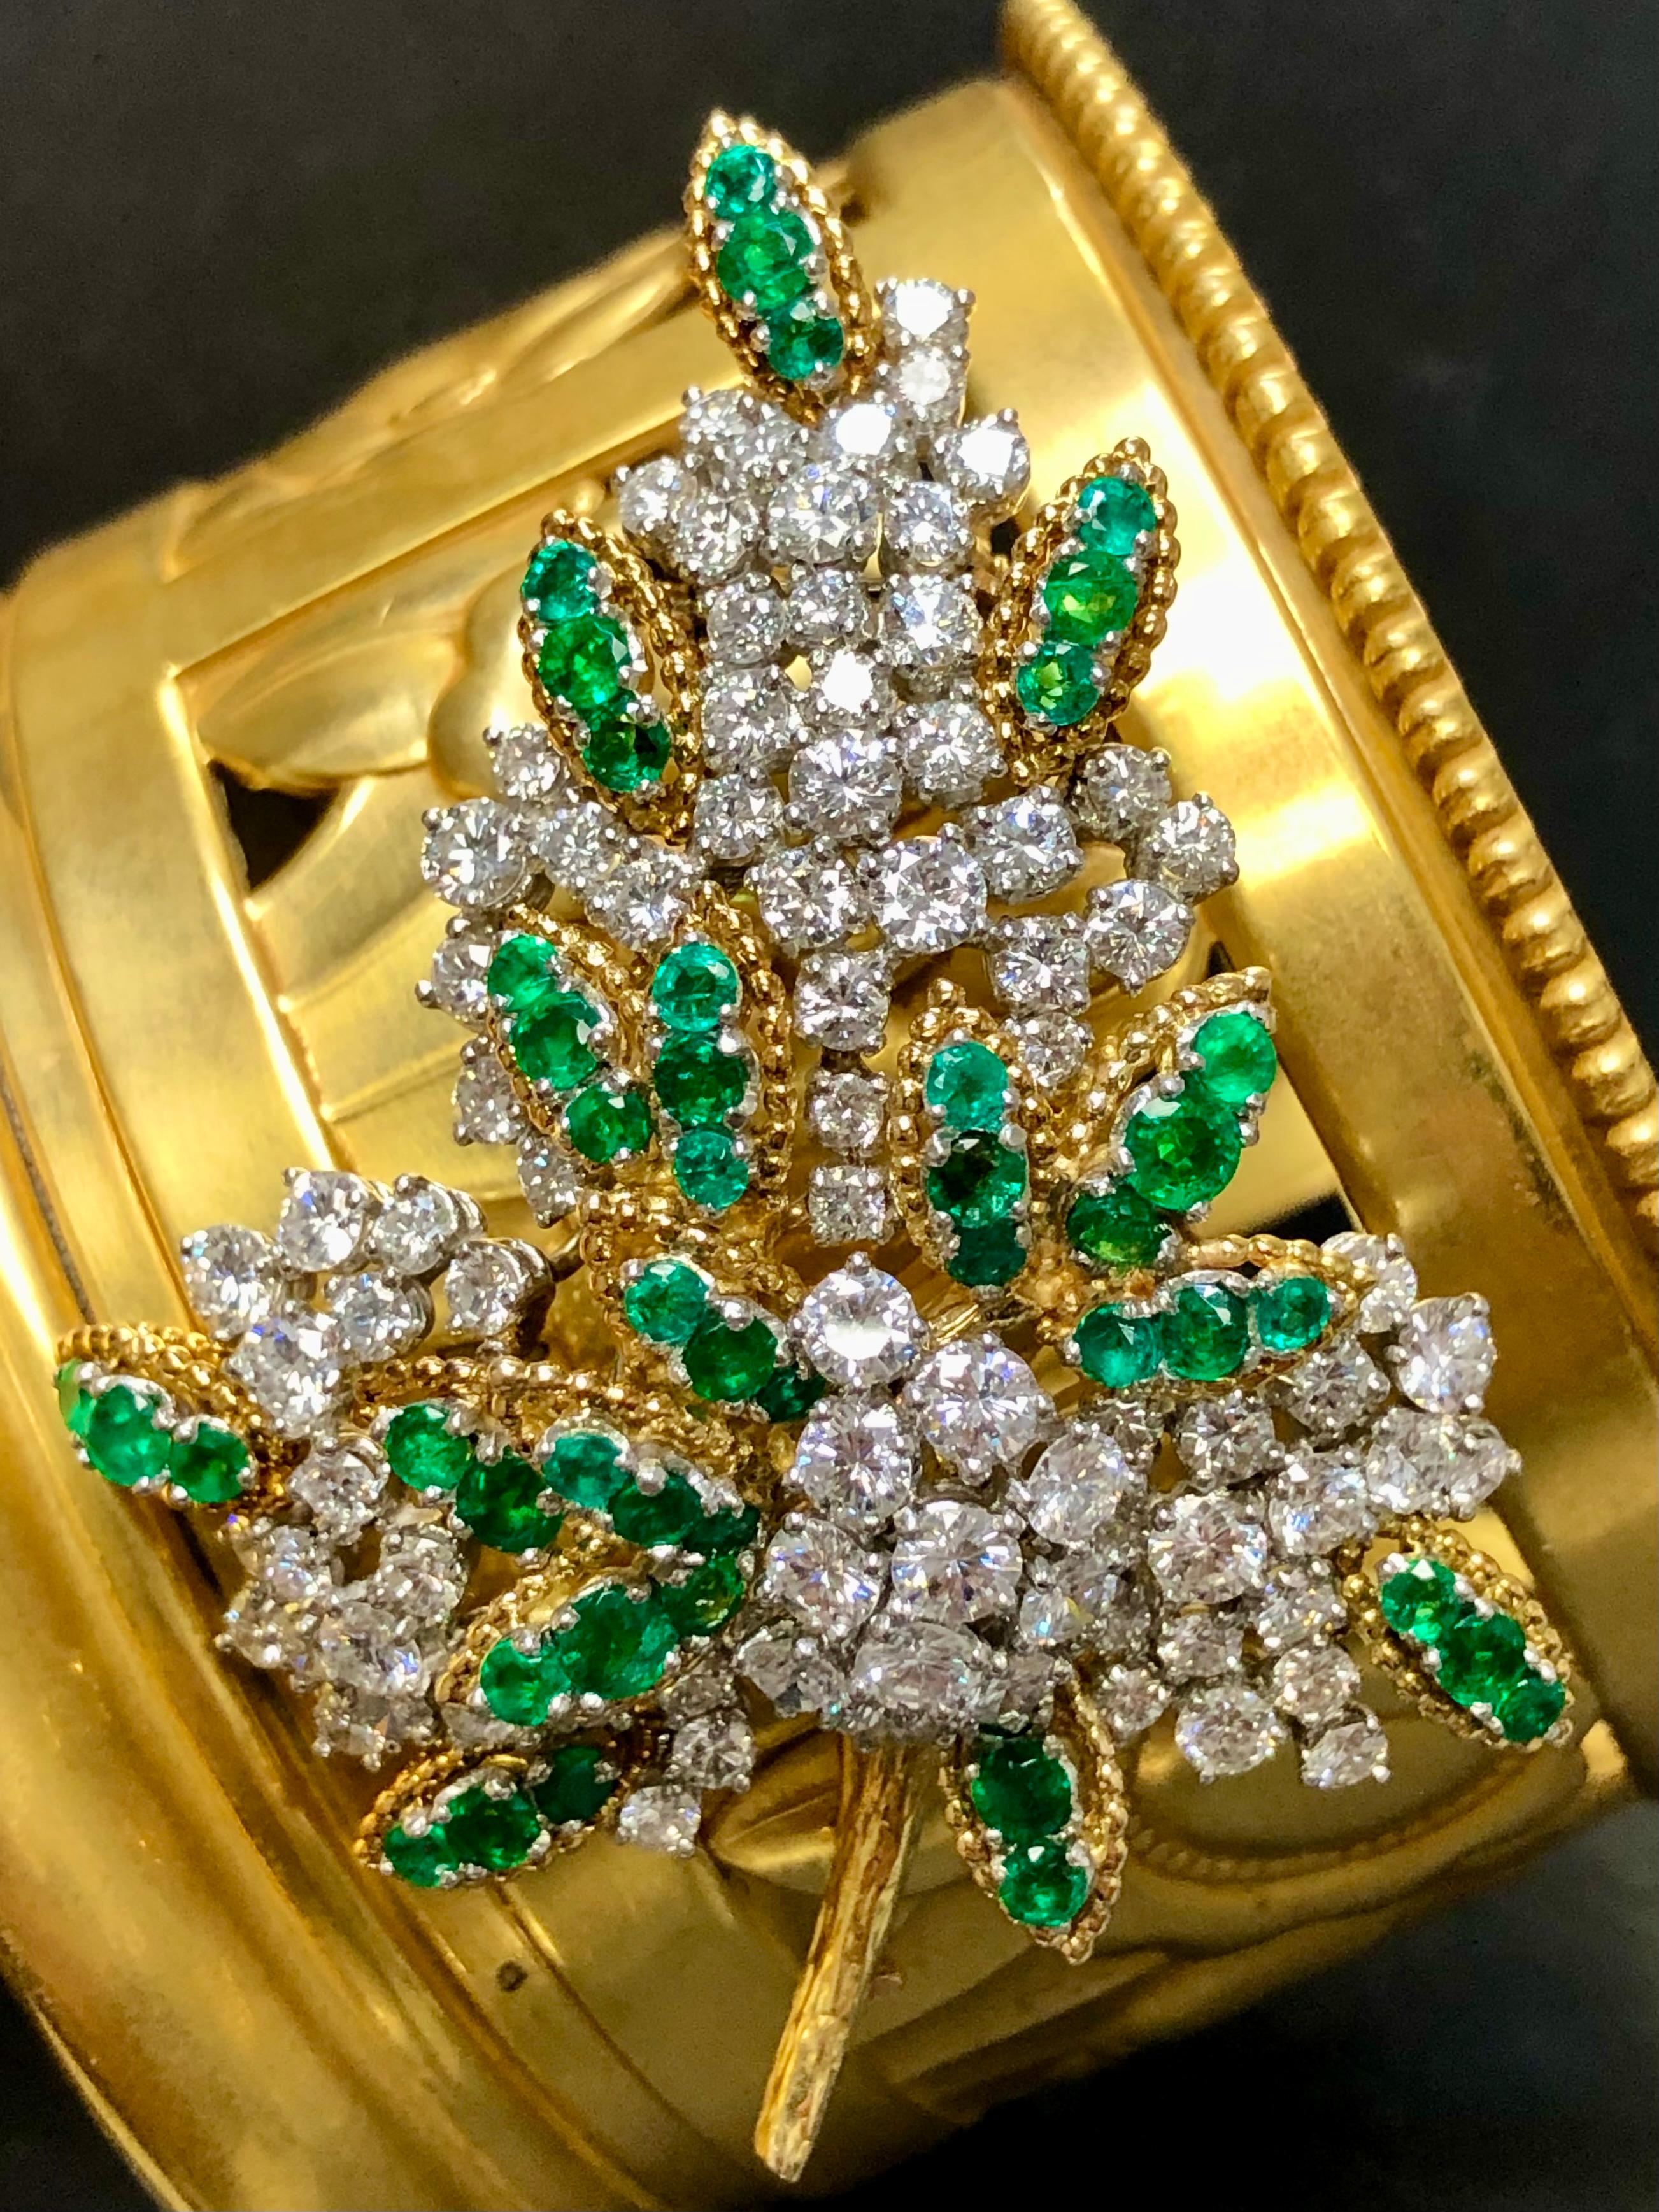 French made brooch done in 18K yellow gold and platinum circa 1960’s set with approximately 8cttw in larger G-H color Vs1-2 clarity rounds diamonds as well as approximately 5cttw in vibrant green emeralds. All hallmarks and export marks are